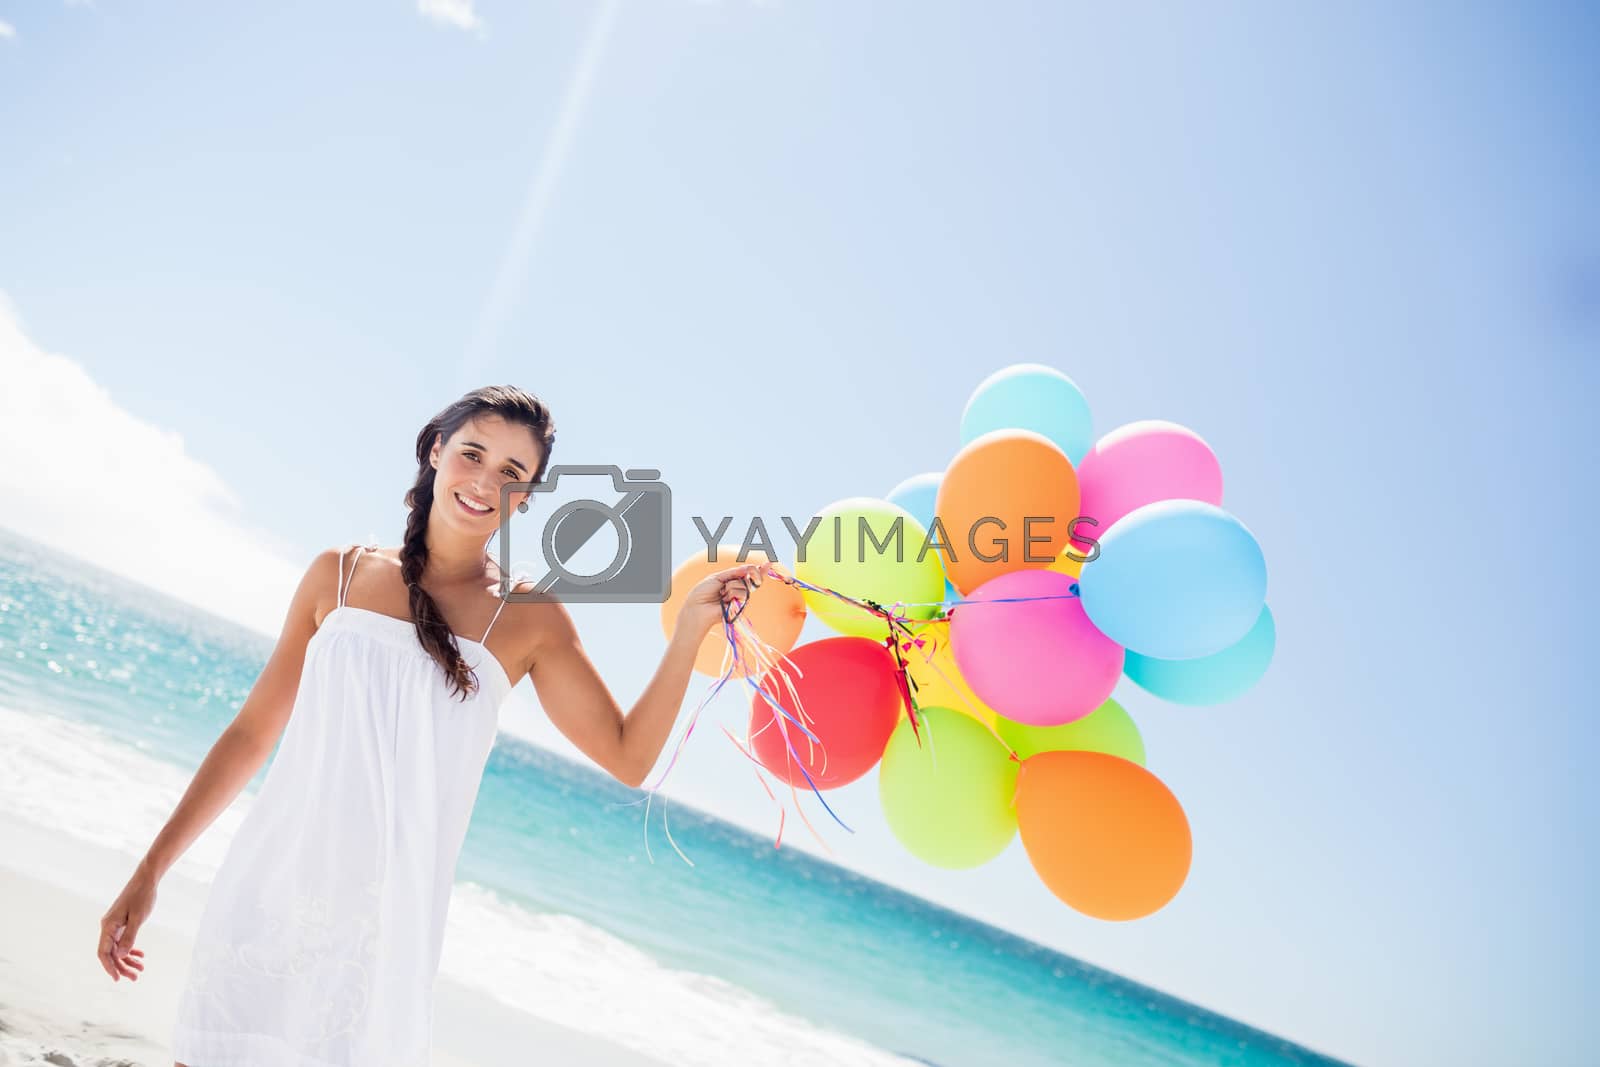 Royalty free image of  Beautiful woman holding balloon by Wavebreakmedia